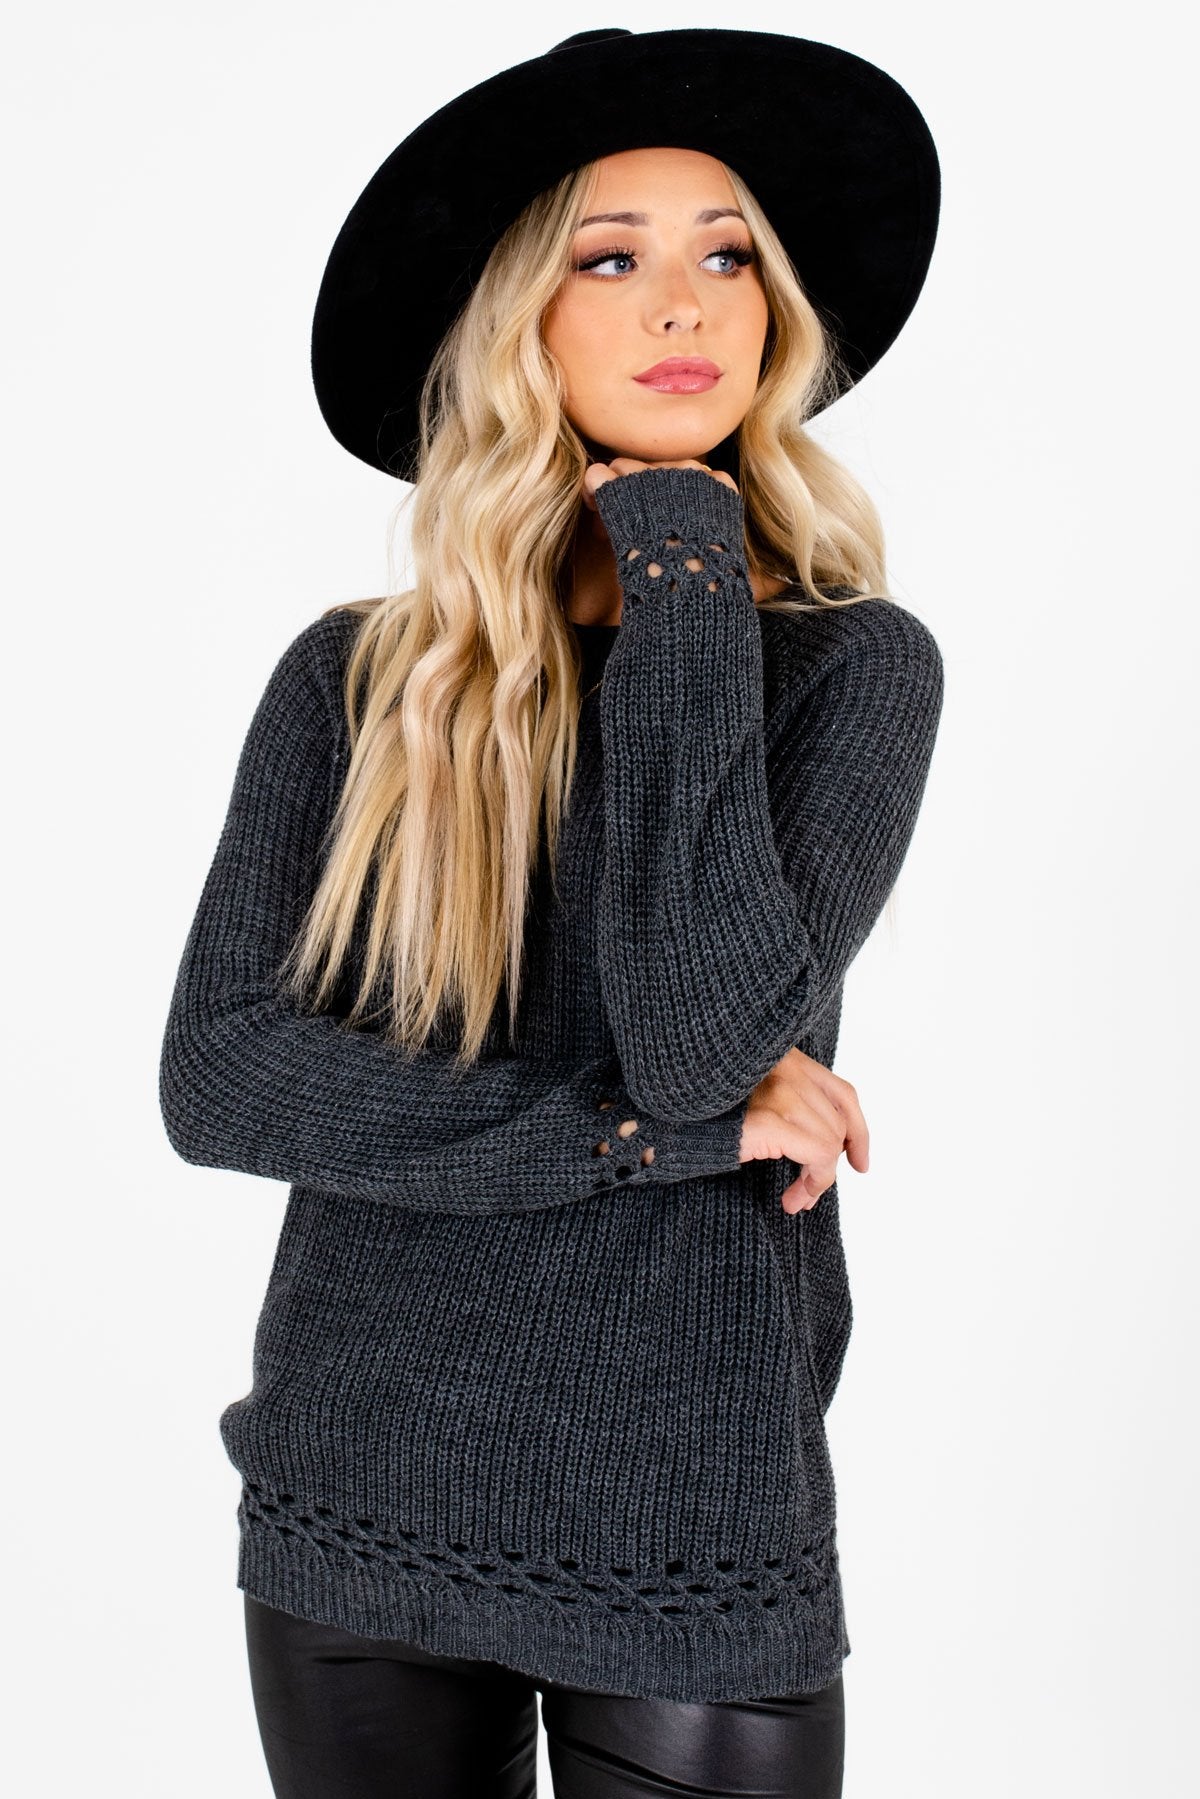 Charcoal Gray Cute and Comfortable Boutique Sweaters for Women